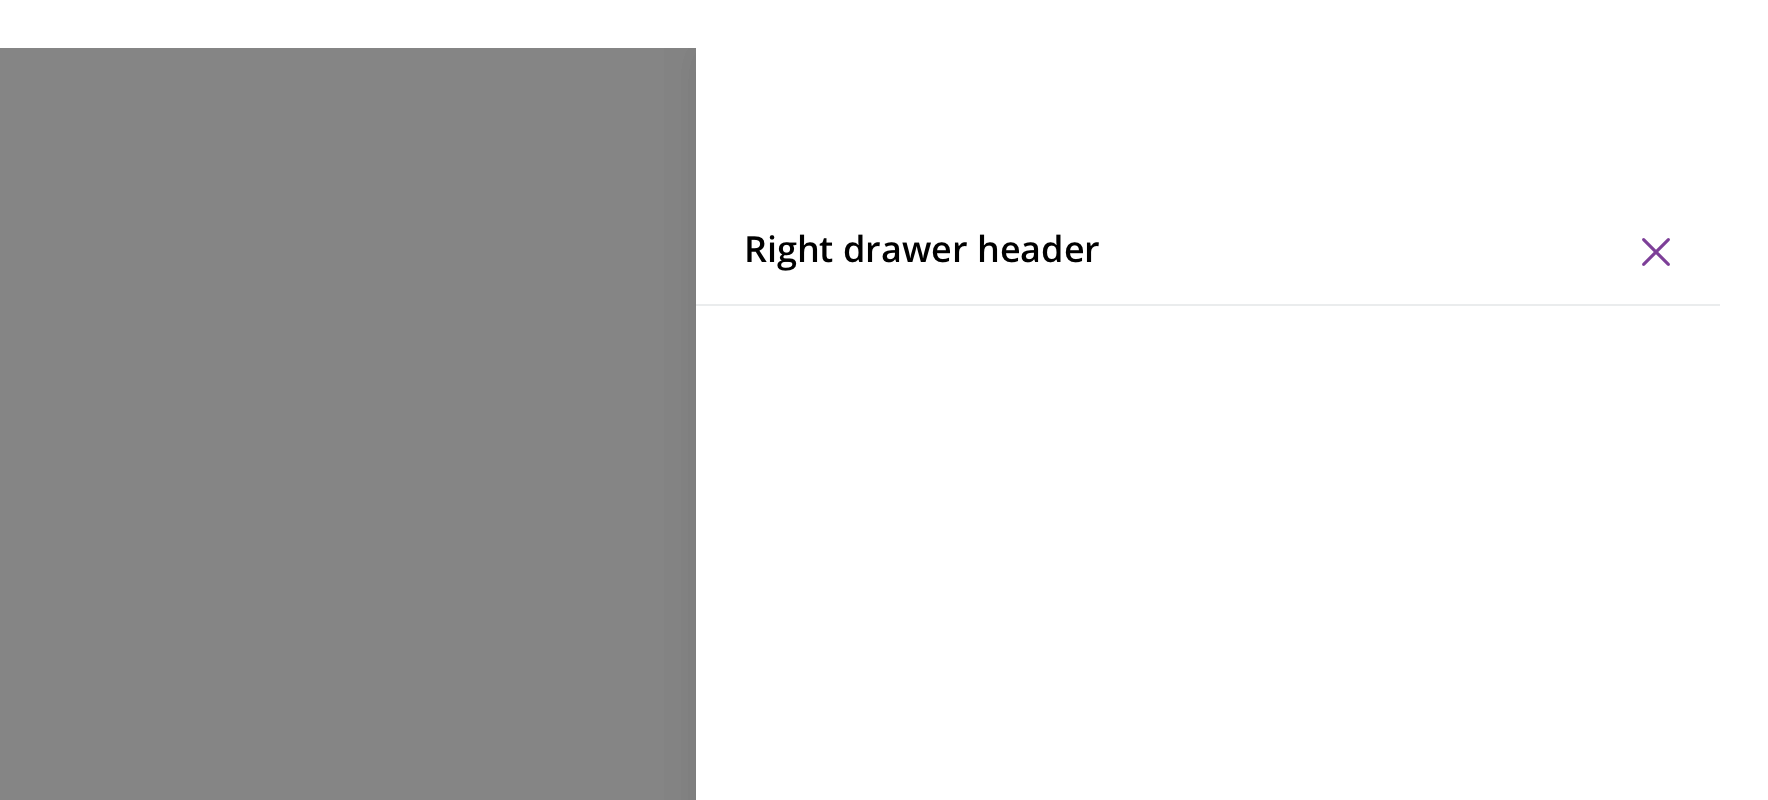 Default right drawer